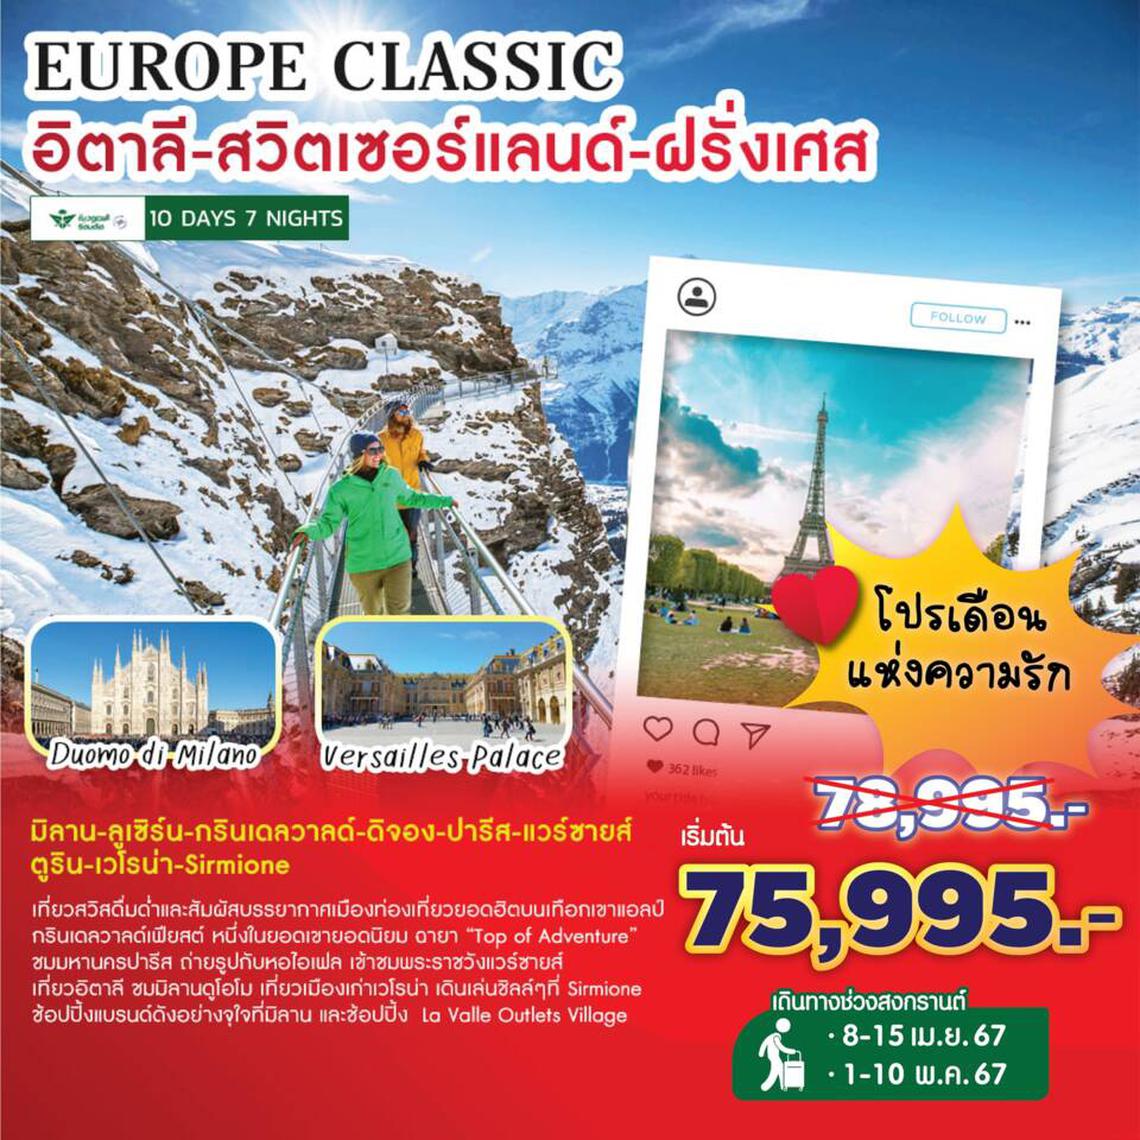 EUCLASSIC-SV EUROPE CLASSIC (ITALY-SWISS-FRANCE) 10D 7N BY SV